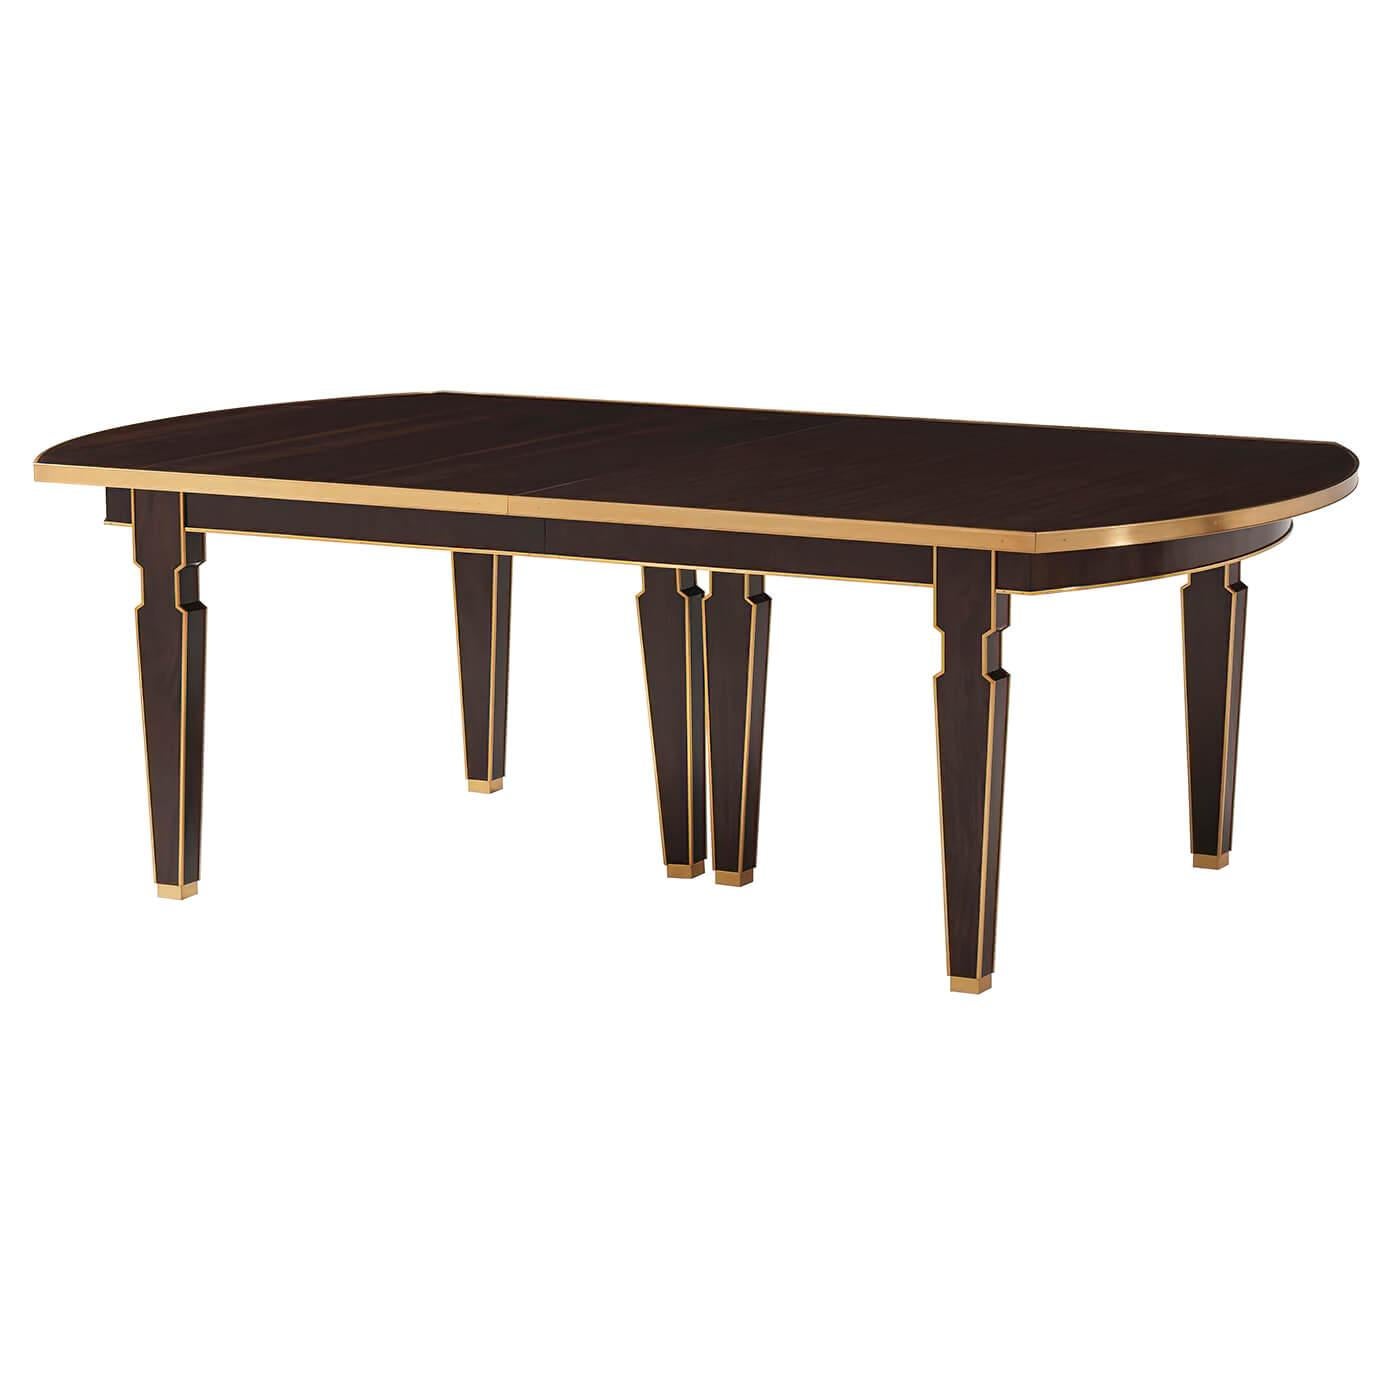 An Art Deco style extension dining table with a historic classic Silhouette. The rectangular dining table with curved ends and a brass-bound apron. Set on slatted baluster legs trimmed and outlined in gilt. 

Open dimensions: 162